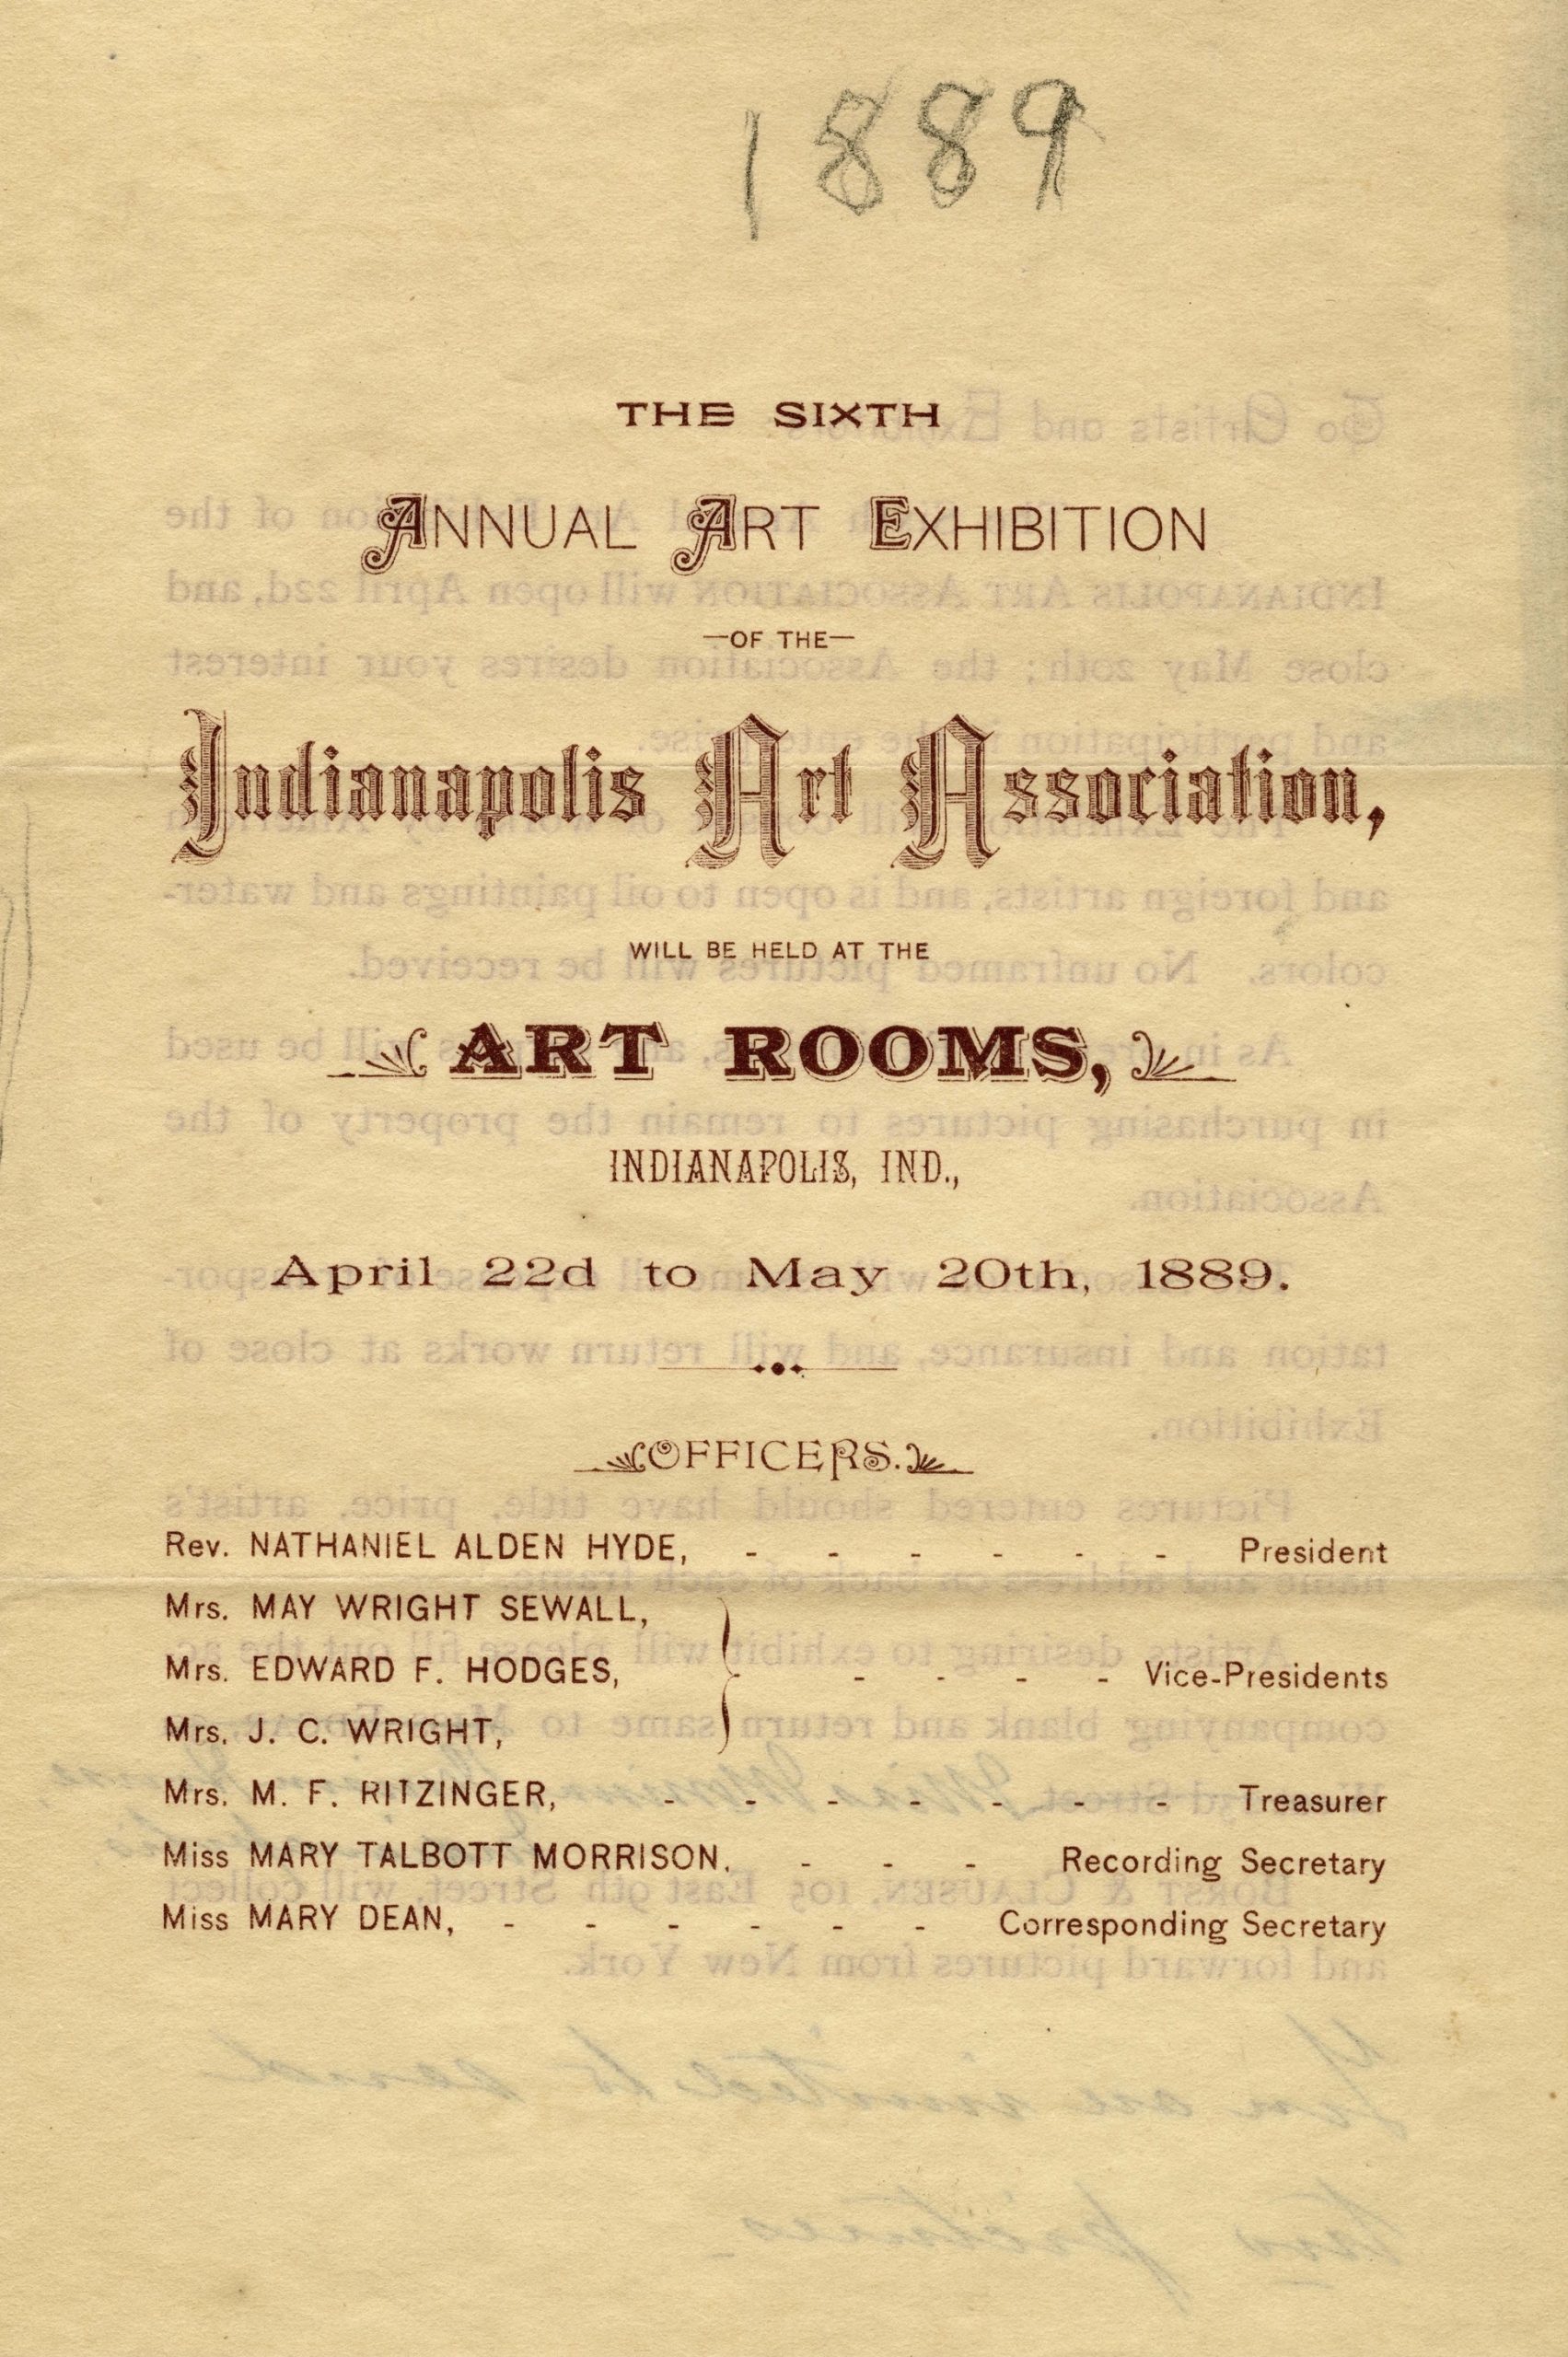 The invitation lists the location and dates of the exhibition and the names of the officers.